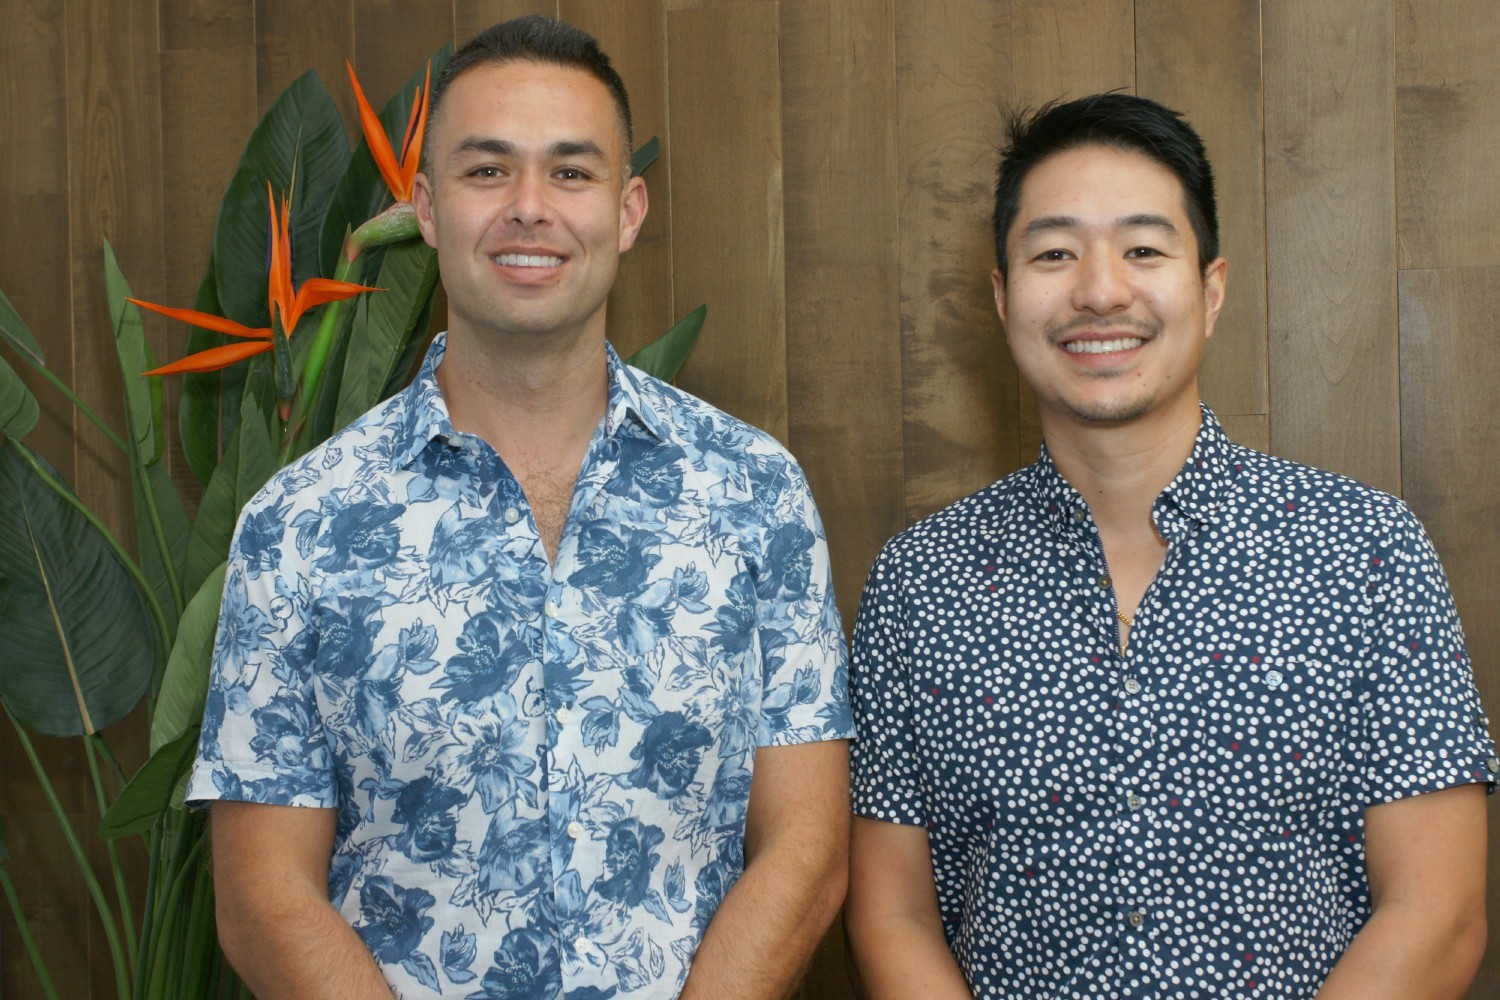 Co-founders, Taylor Smith and Kevin Yip